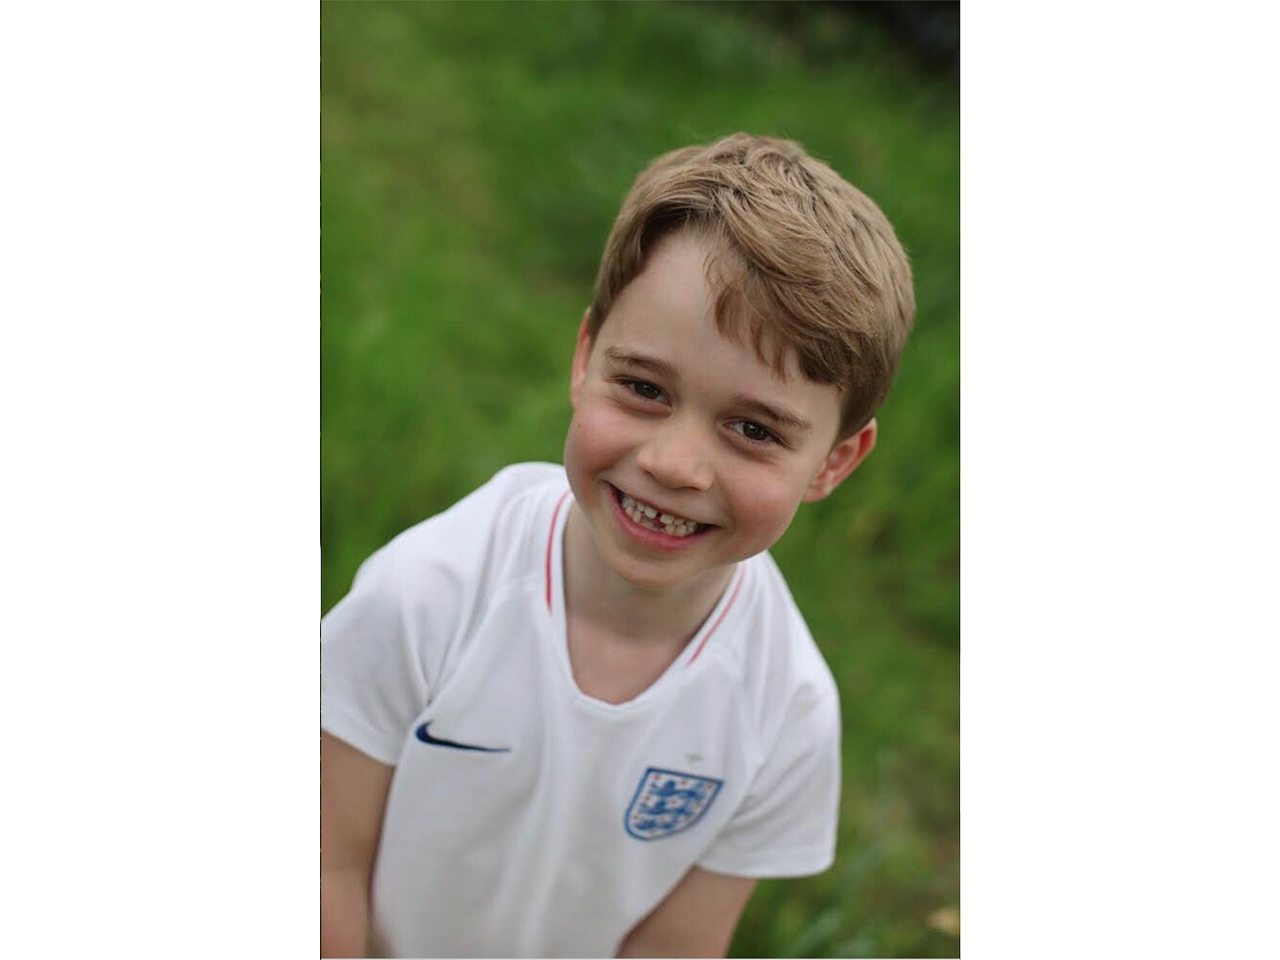 Prince George smiling in a soccer shirt